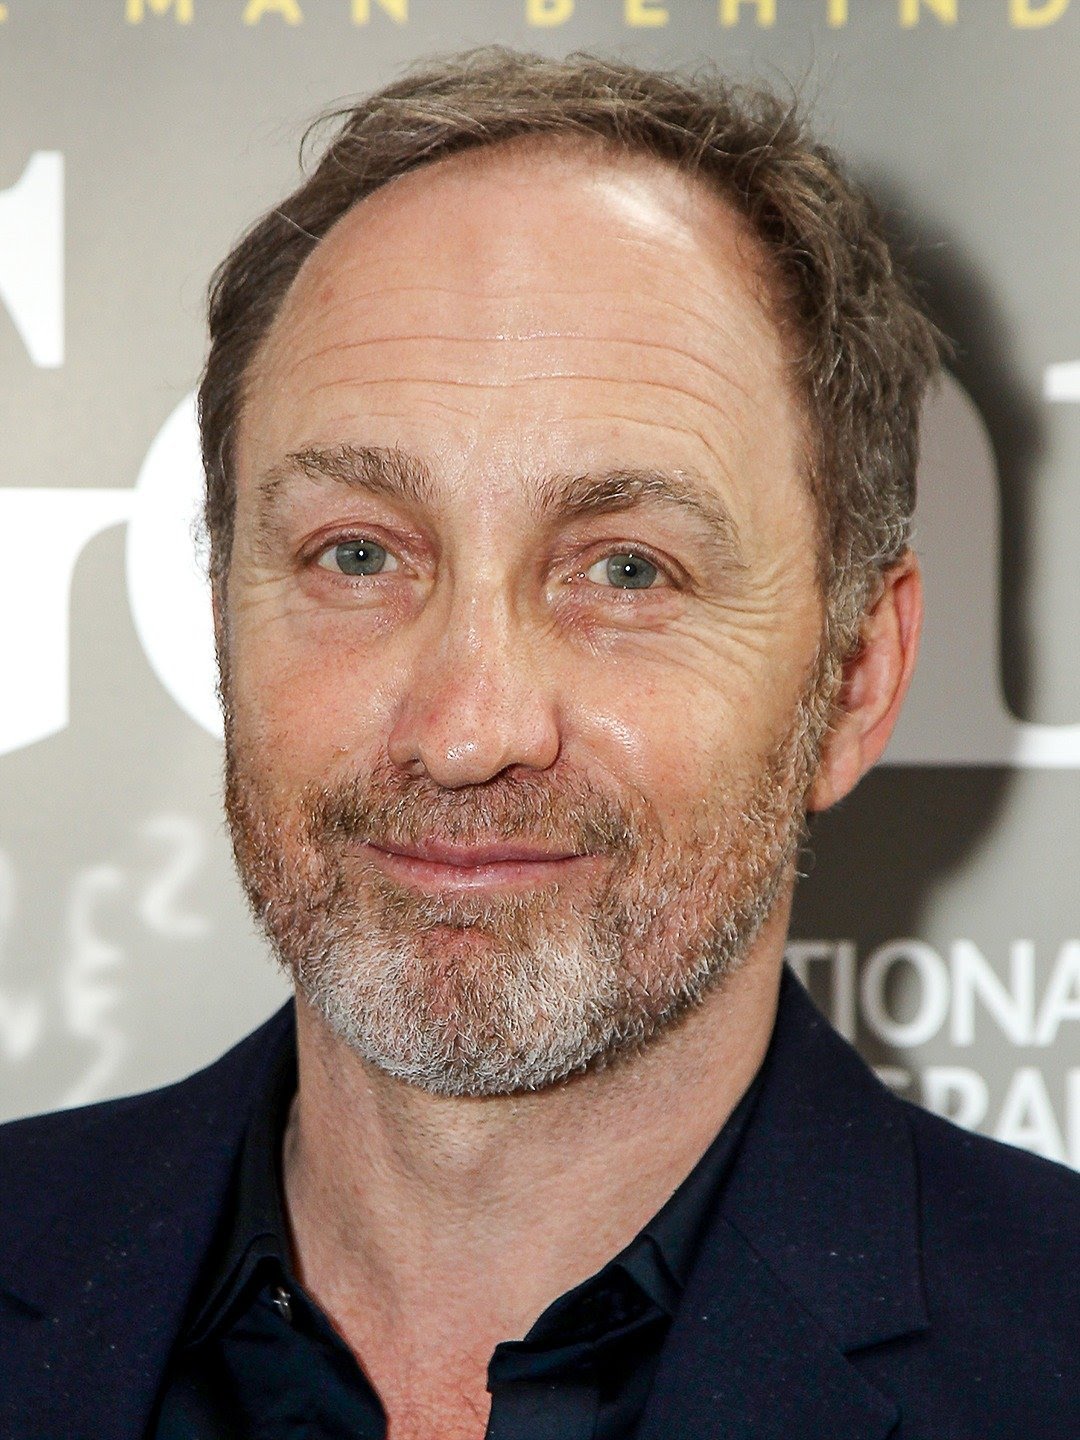 “I served Michael McElhatton (Roose Bolton from Game of Thrones) when he and his wife came into the pub I was working at. He was super sweet and really happy to chat about his character. I told him he was very easy to dislike, and he laughed and said he was doing a good job then. His wife complimented my accent (I’m Canadian living in Dublin), and they left a really good tip.

“Definitely one of my less embarrassing celebrity run-ins.